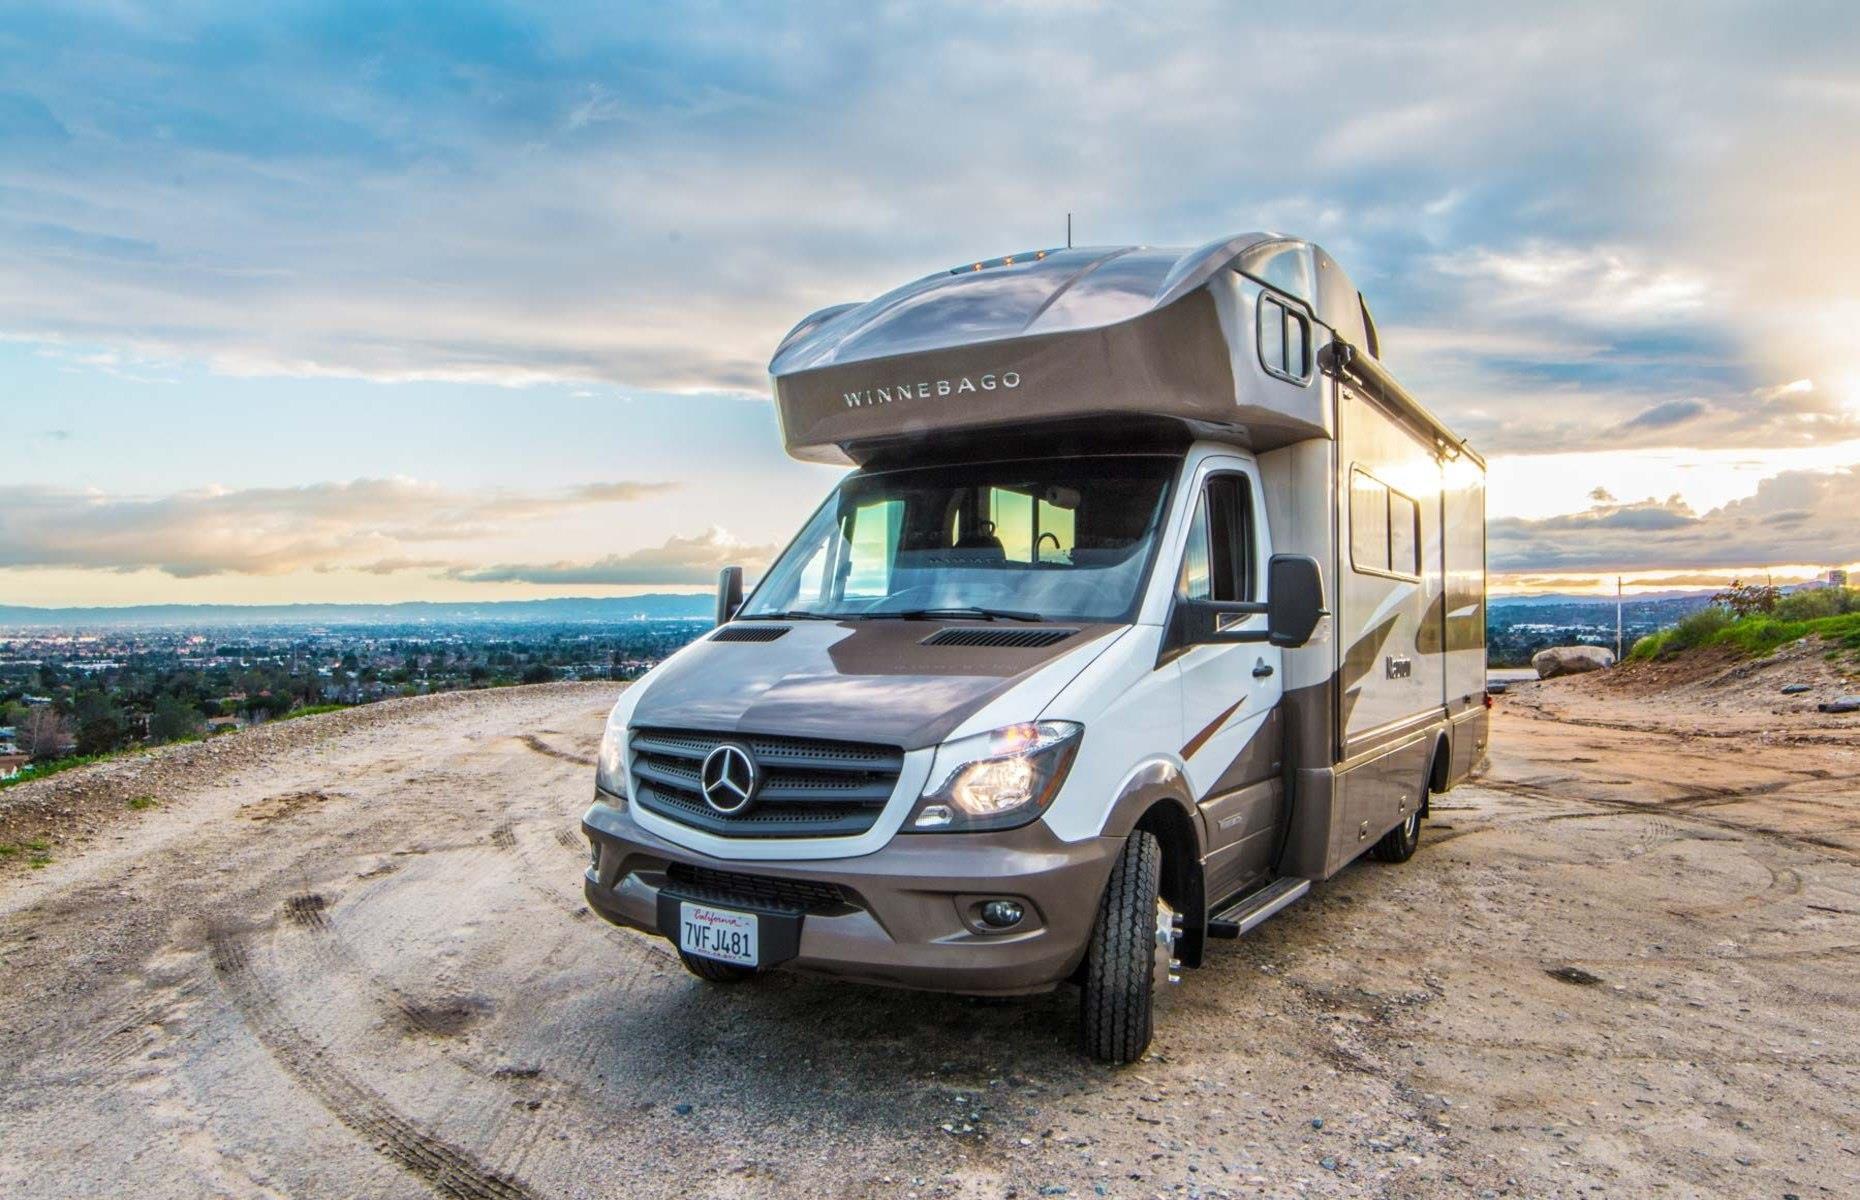 Fancy a cross-country adventure on wheels but with all the creature comforts? From cute and cozy RVs to more glamorous and spacious vehicles, we take a look at the budget-friendly luxury motorhomes to rent for a summer road trip across the US. Please note, prices vary depending on the time of year and are correct at the time of writing.